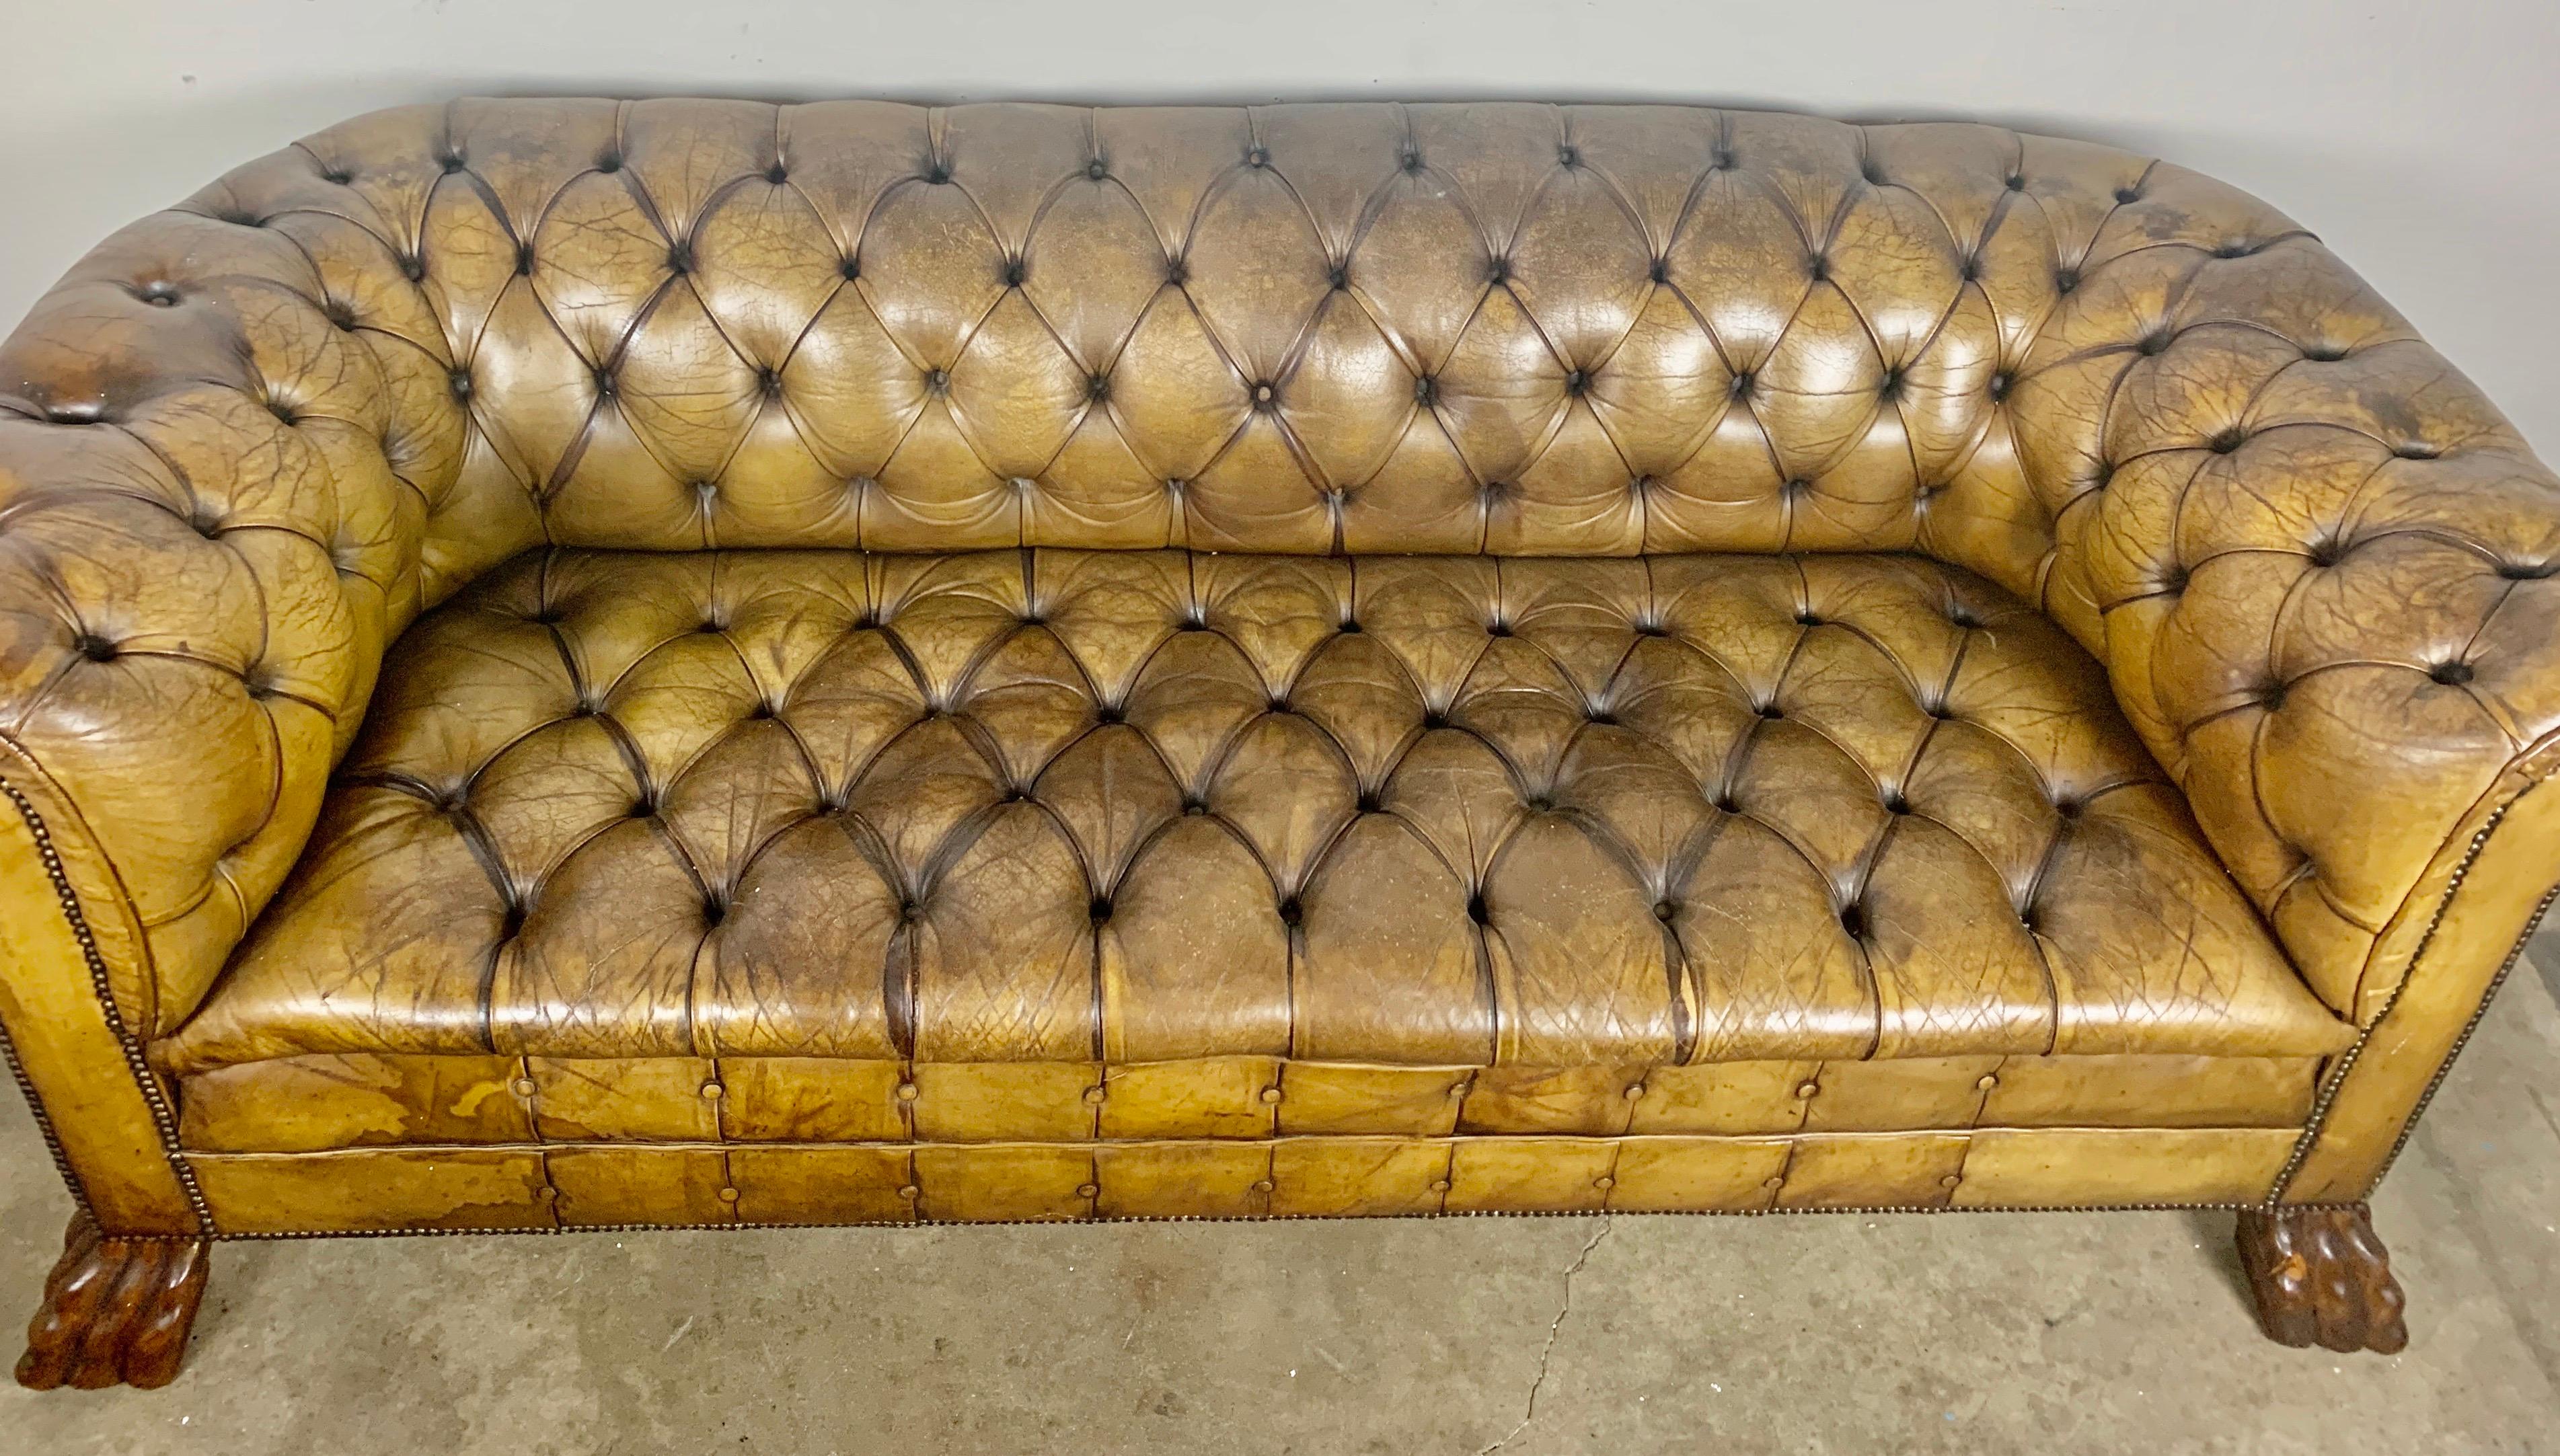 Early 20th Century English Leather Tufted Chesterfield Sofa, circa 1900s